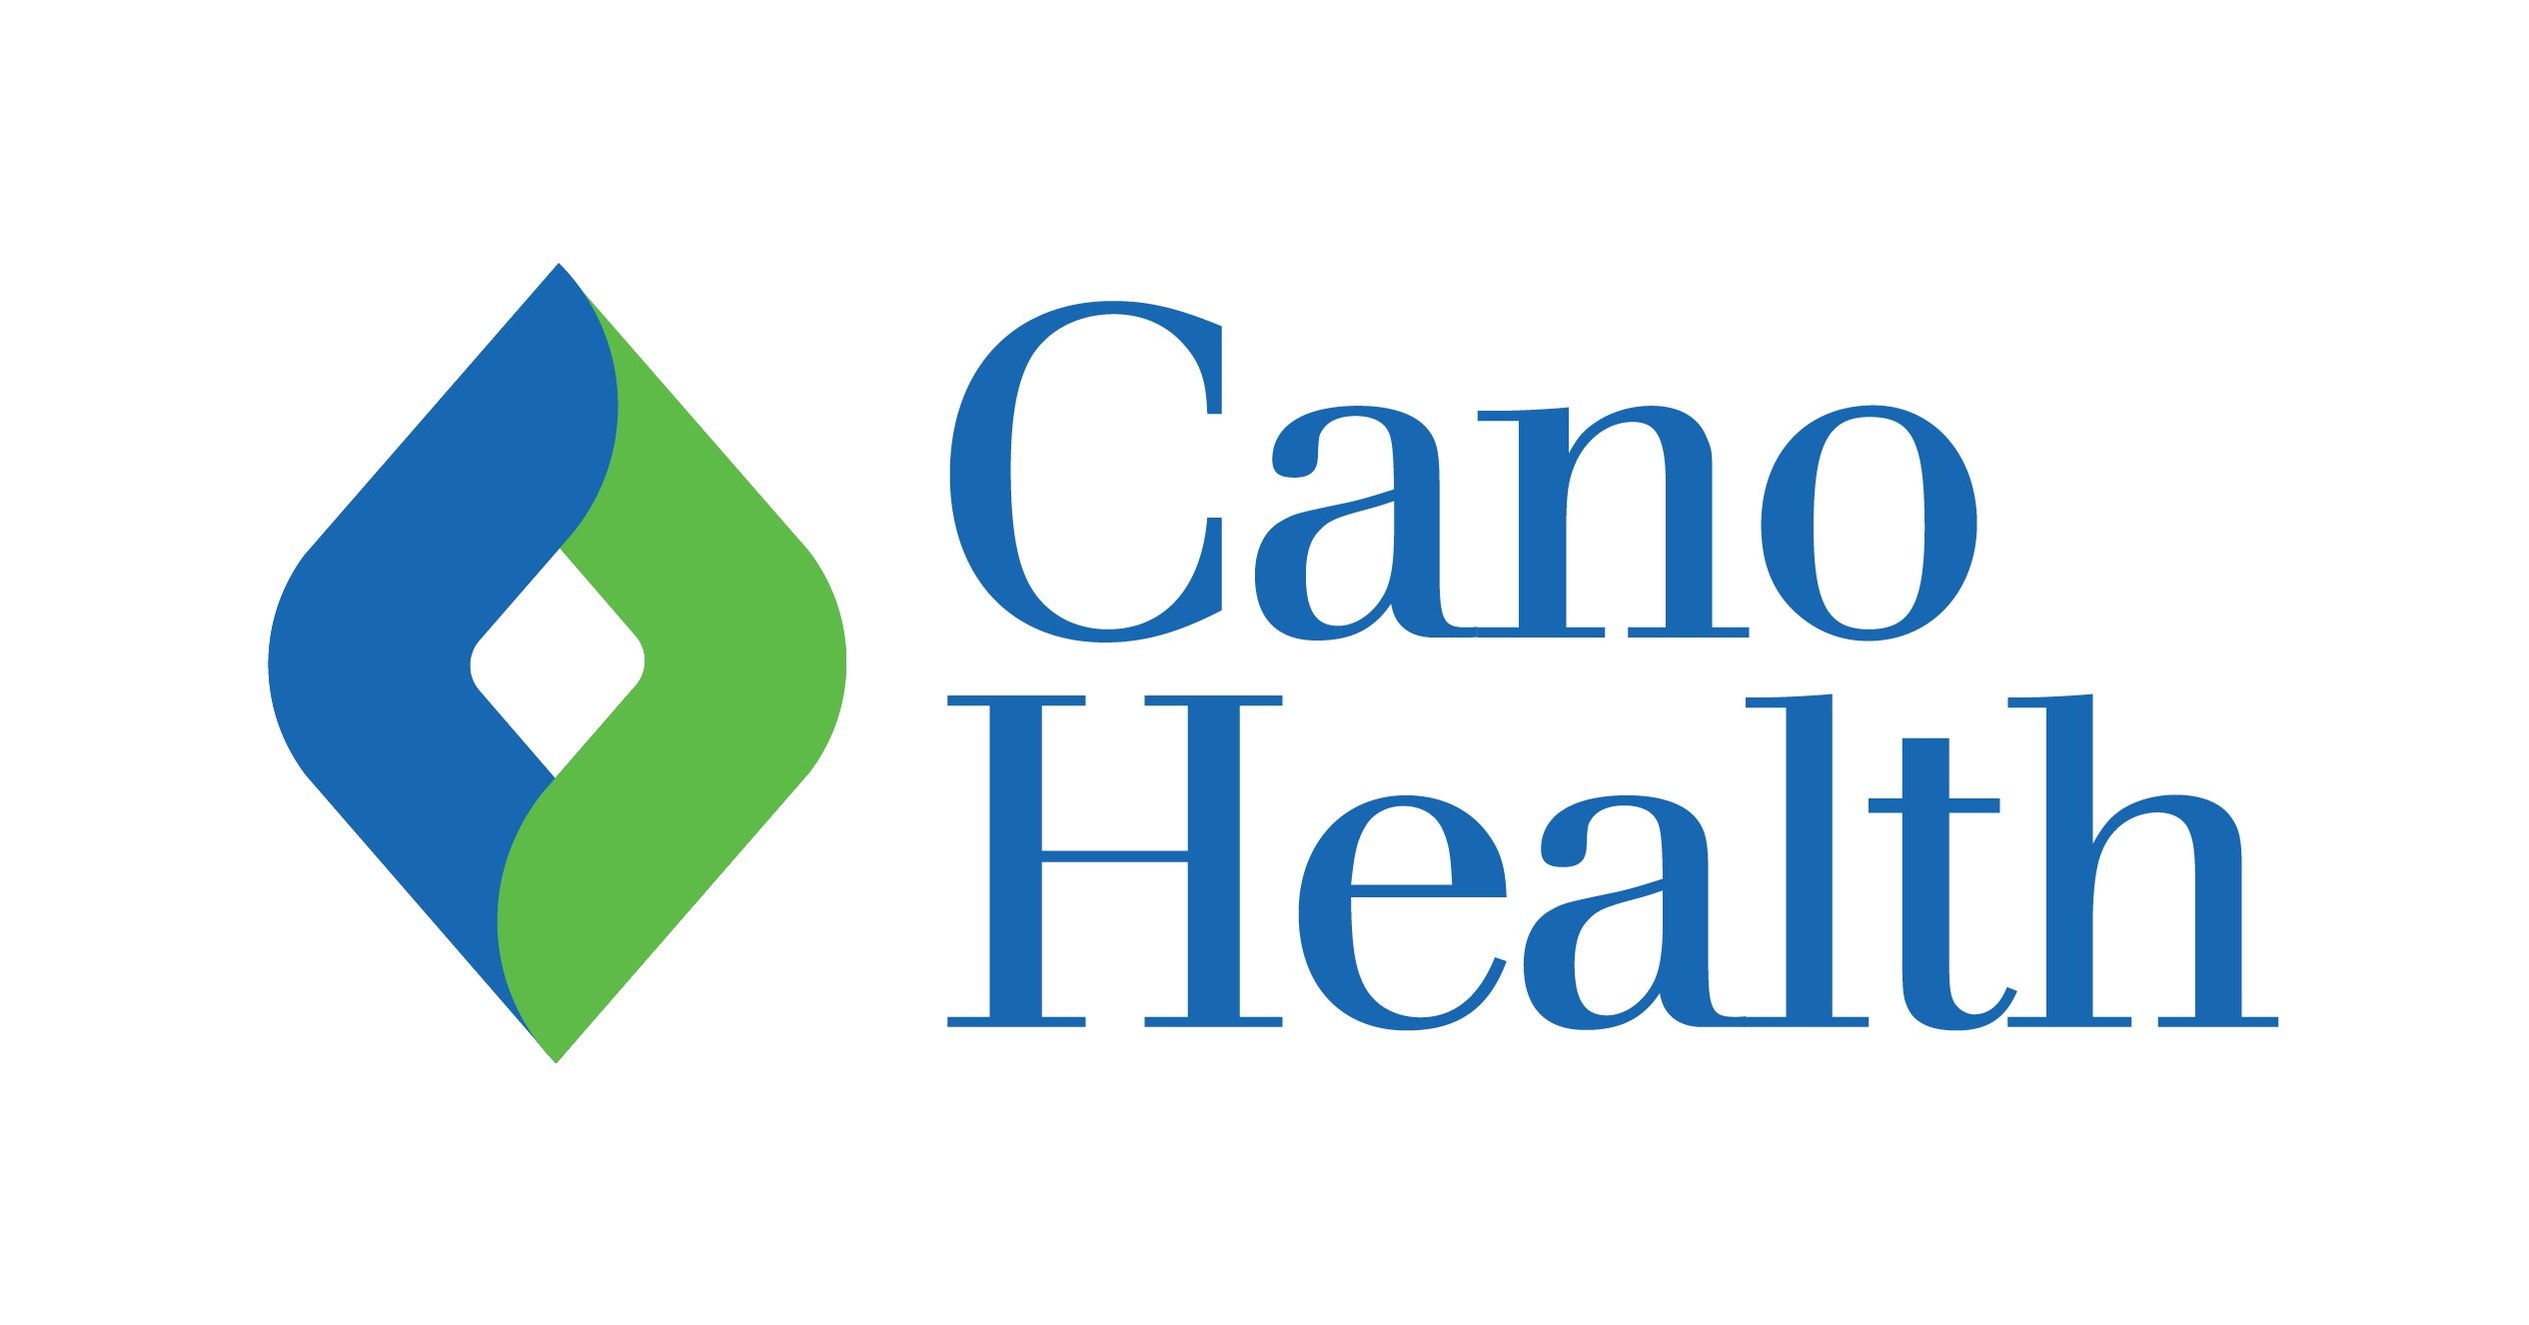 Cano Health Acquires University Health Care for $600 Million and Increases 2021 Adjusted EBITDA Guidance to Over $100 Million